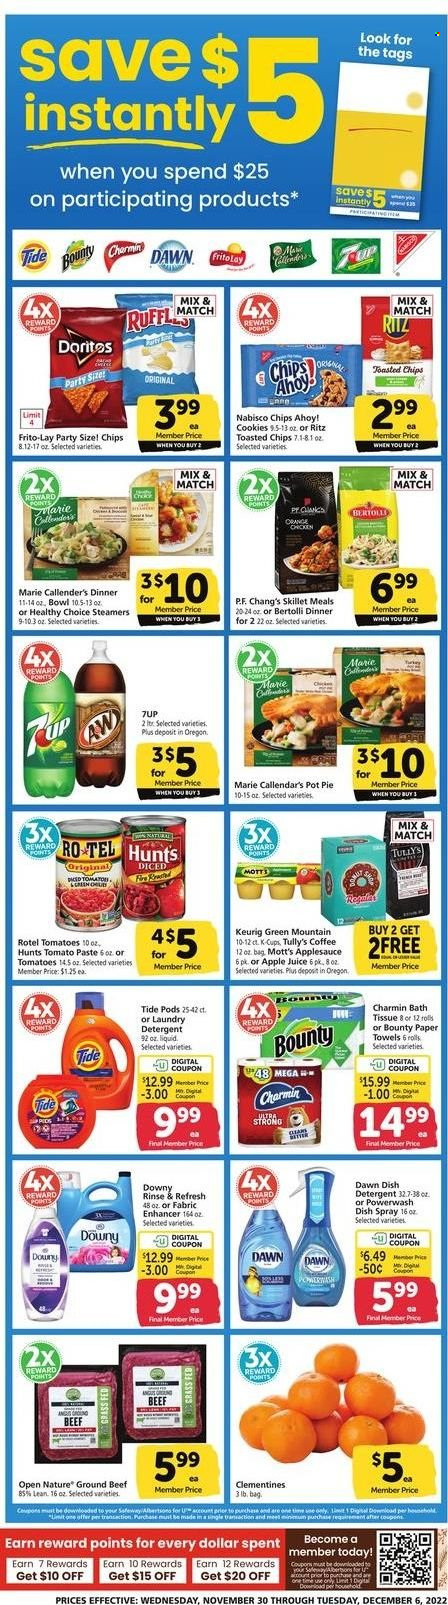 thumbnail - Safeway Flyer - 11/30/2022 - 12/06/2022 - Sales products - pie, pot pie, oranges, Mott's, beef meat, ground beef, Healthy Choice, Marie Callender's, Bertolli, cookies, Bounty, Chips Ahoy!, RITZ, Doritos, chips, Frito-Lay, tomato paste, apple sauce, apple juice, juice, 7UP, coffee, coffee capsules, K-Cups, Keurig, Green Mountain, tissues, kitchen towels, paper towels, Charmin, detergent, Tide, laundry detergent, dishwasher cleaner, pot, bowl, clementines. Page 2.